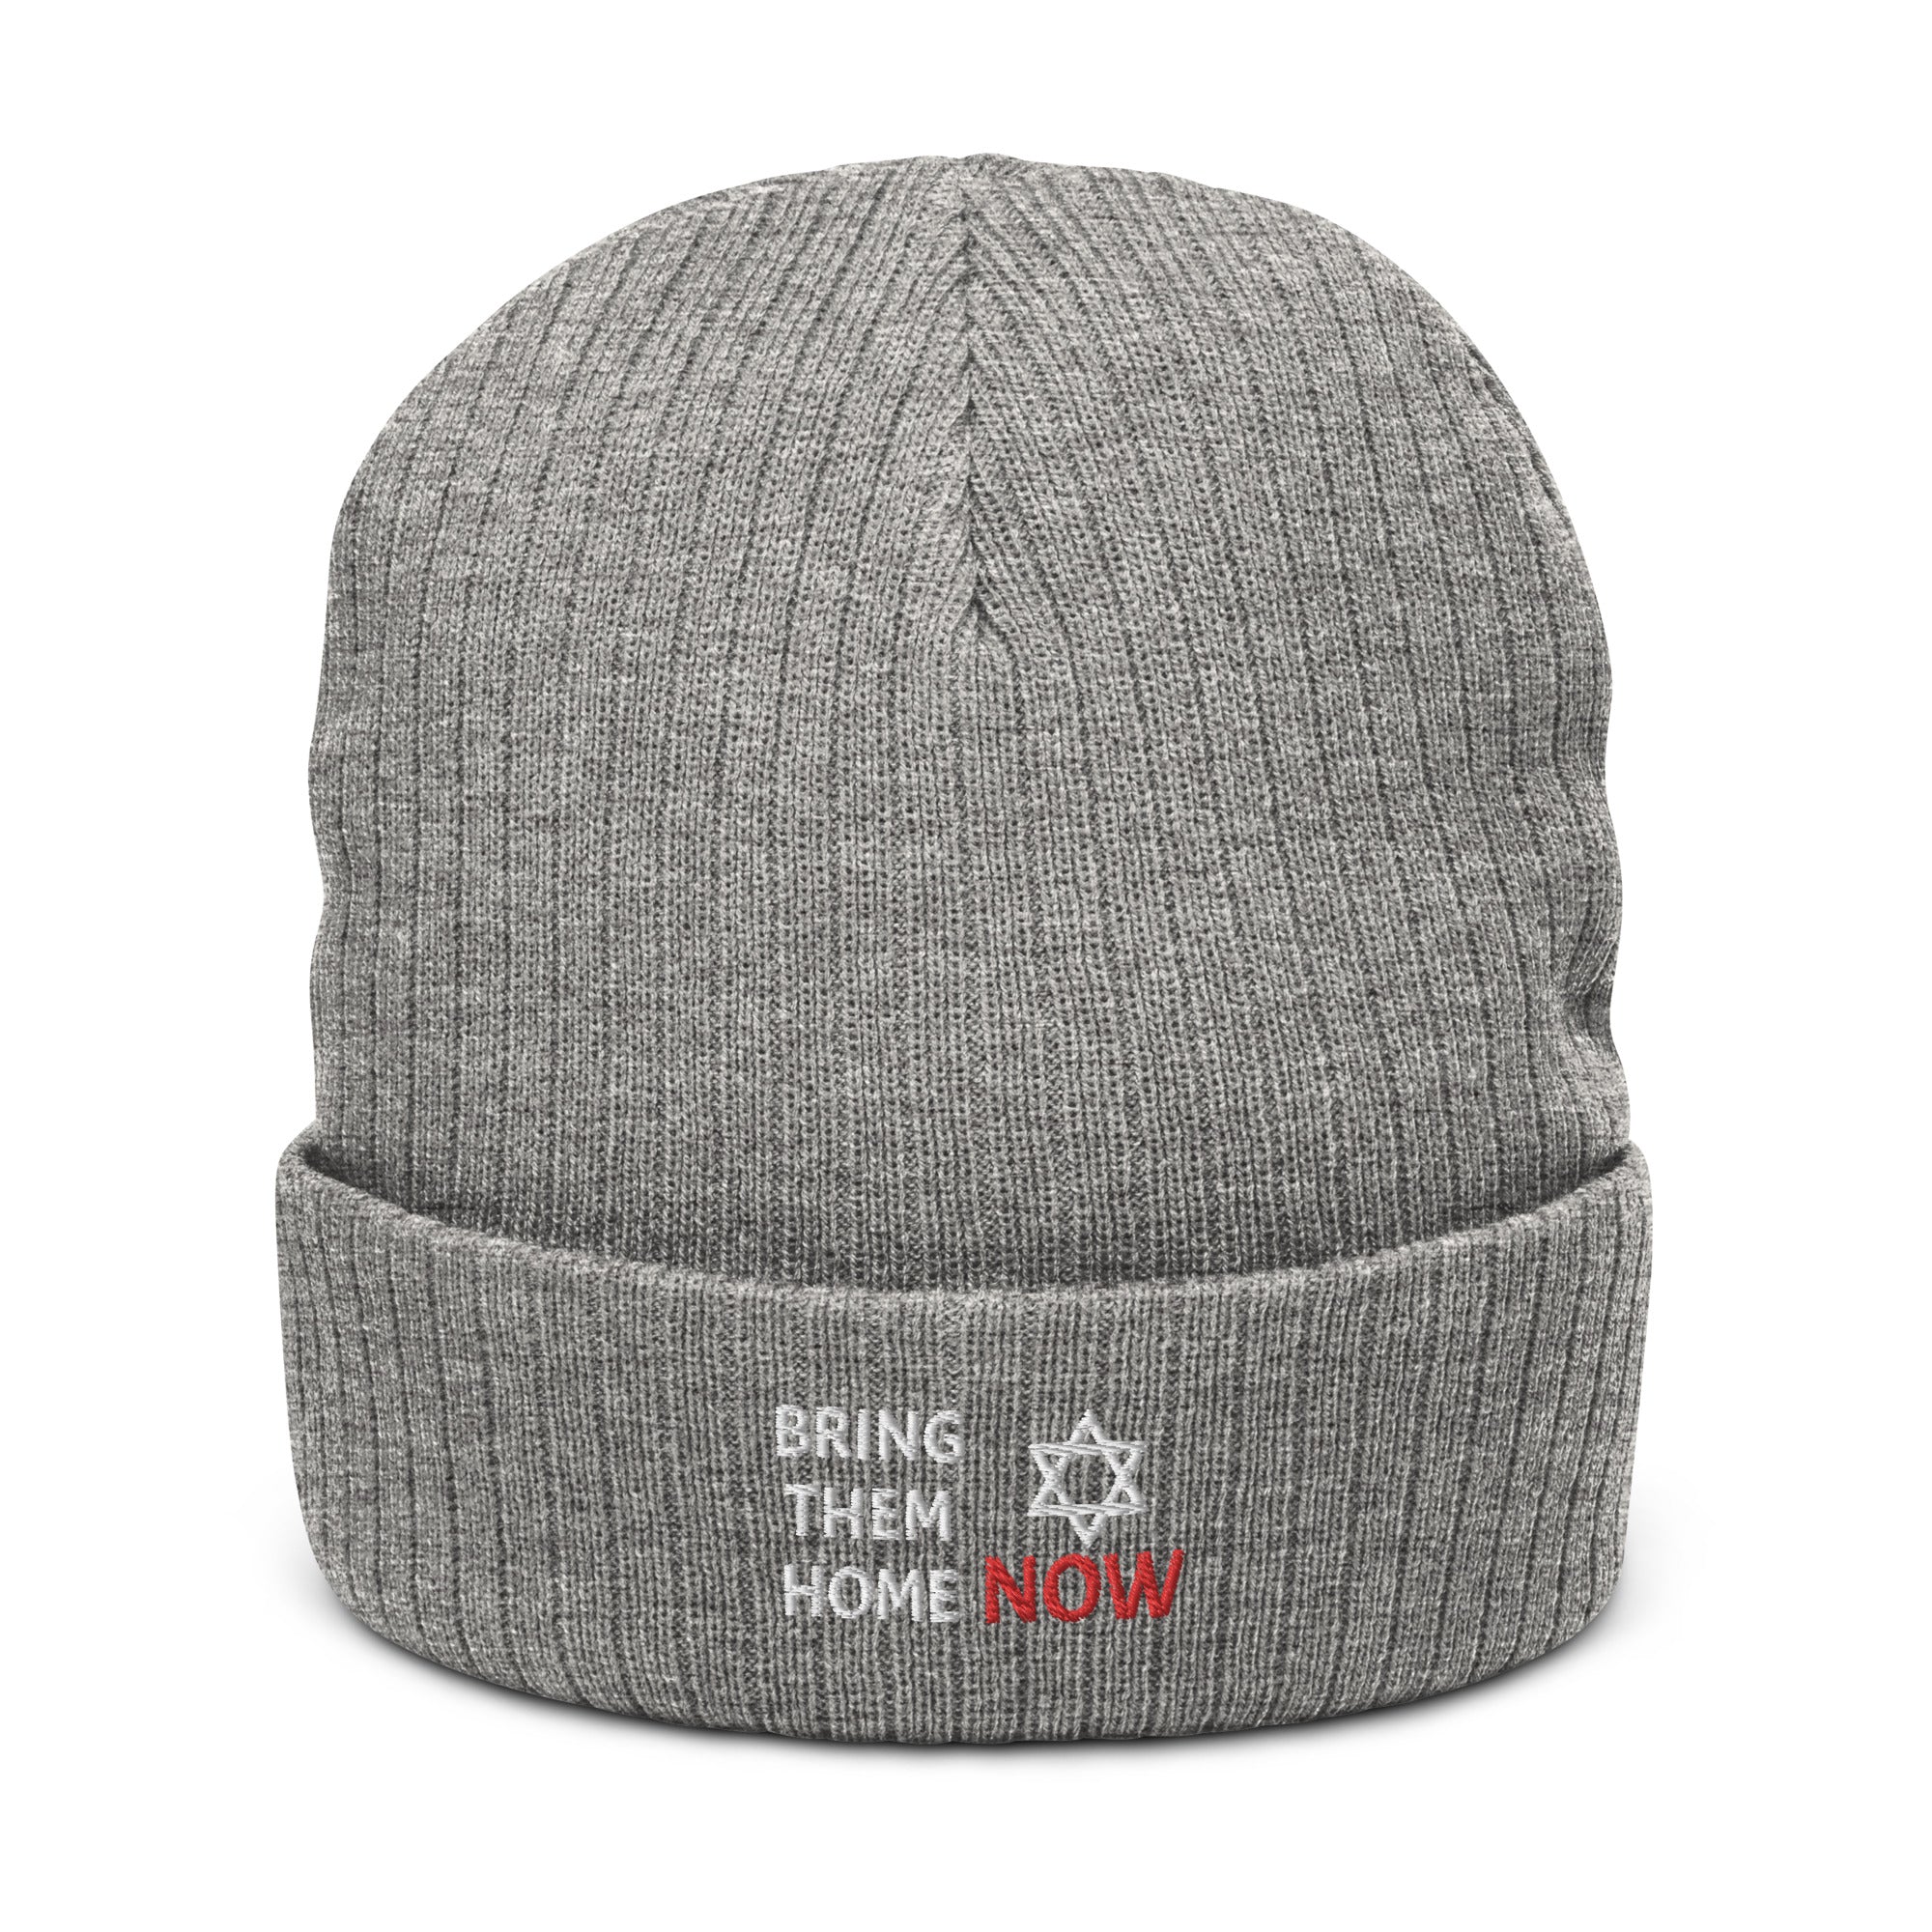 Bring Them Home Now - Ribbed knit beanie